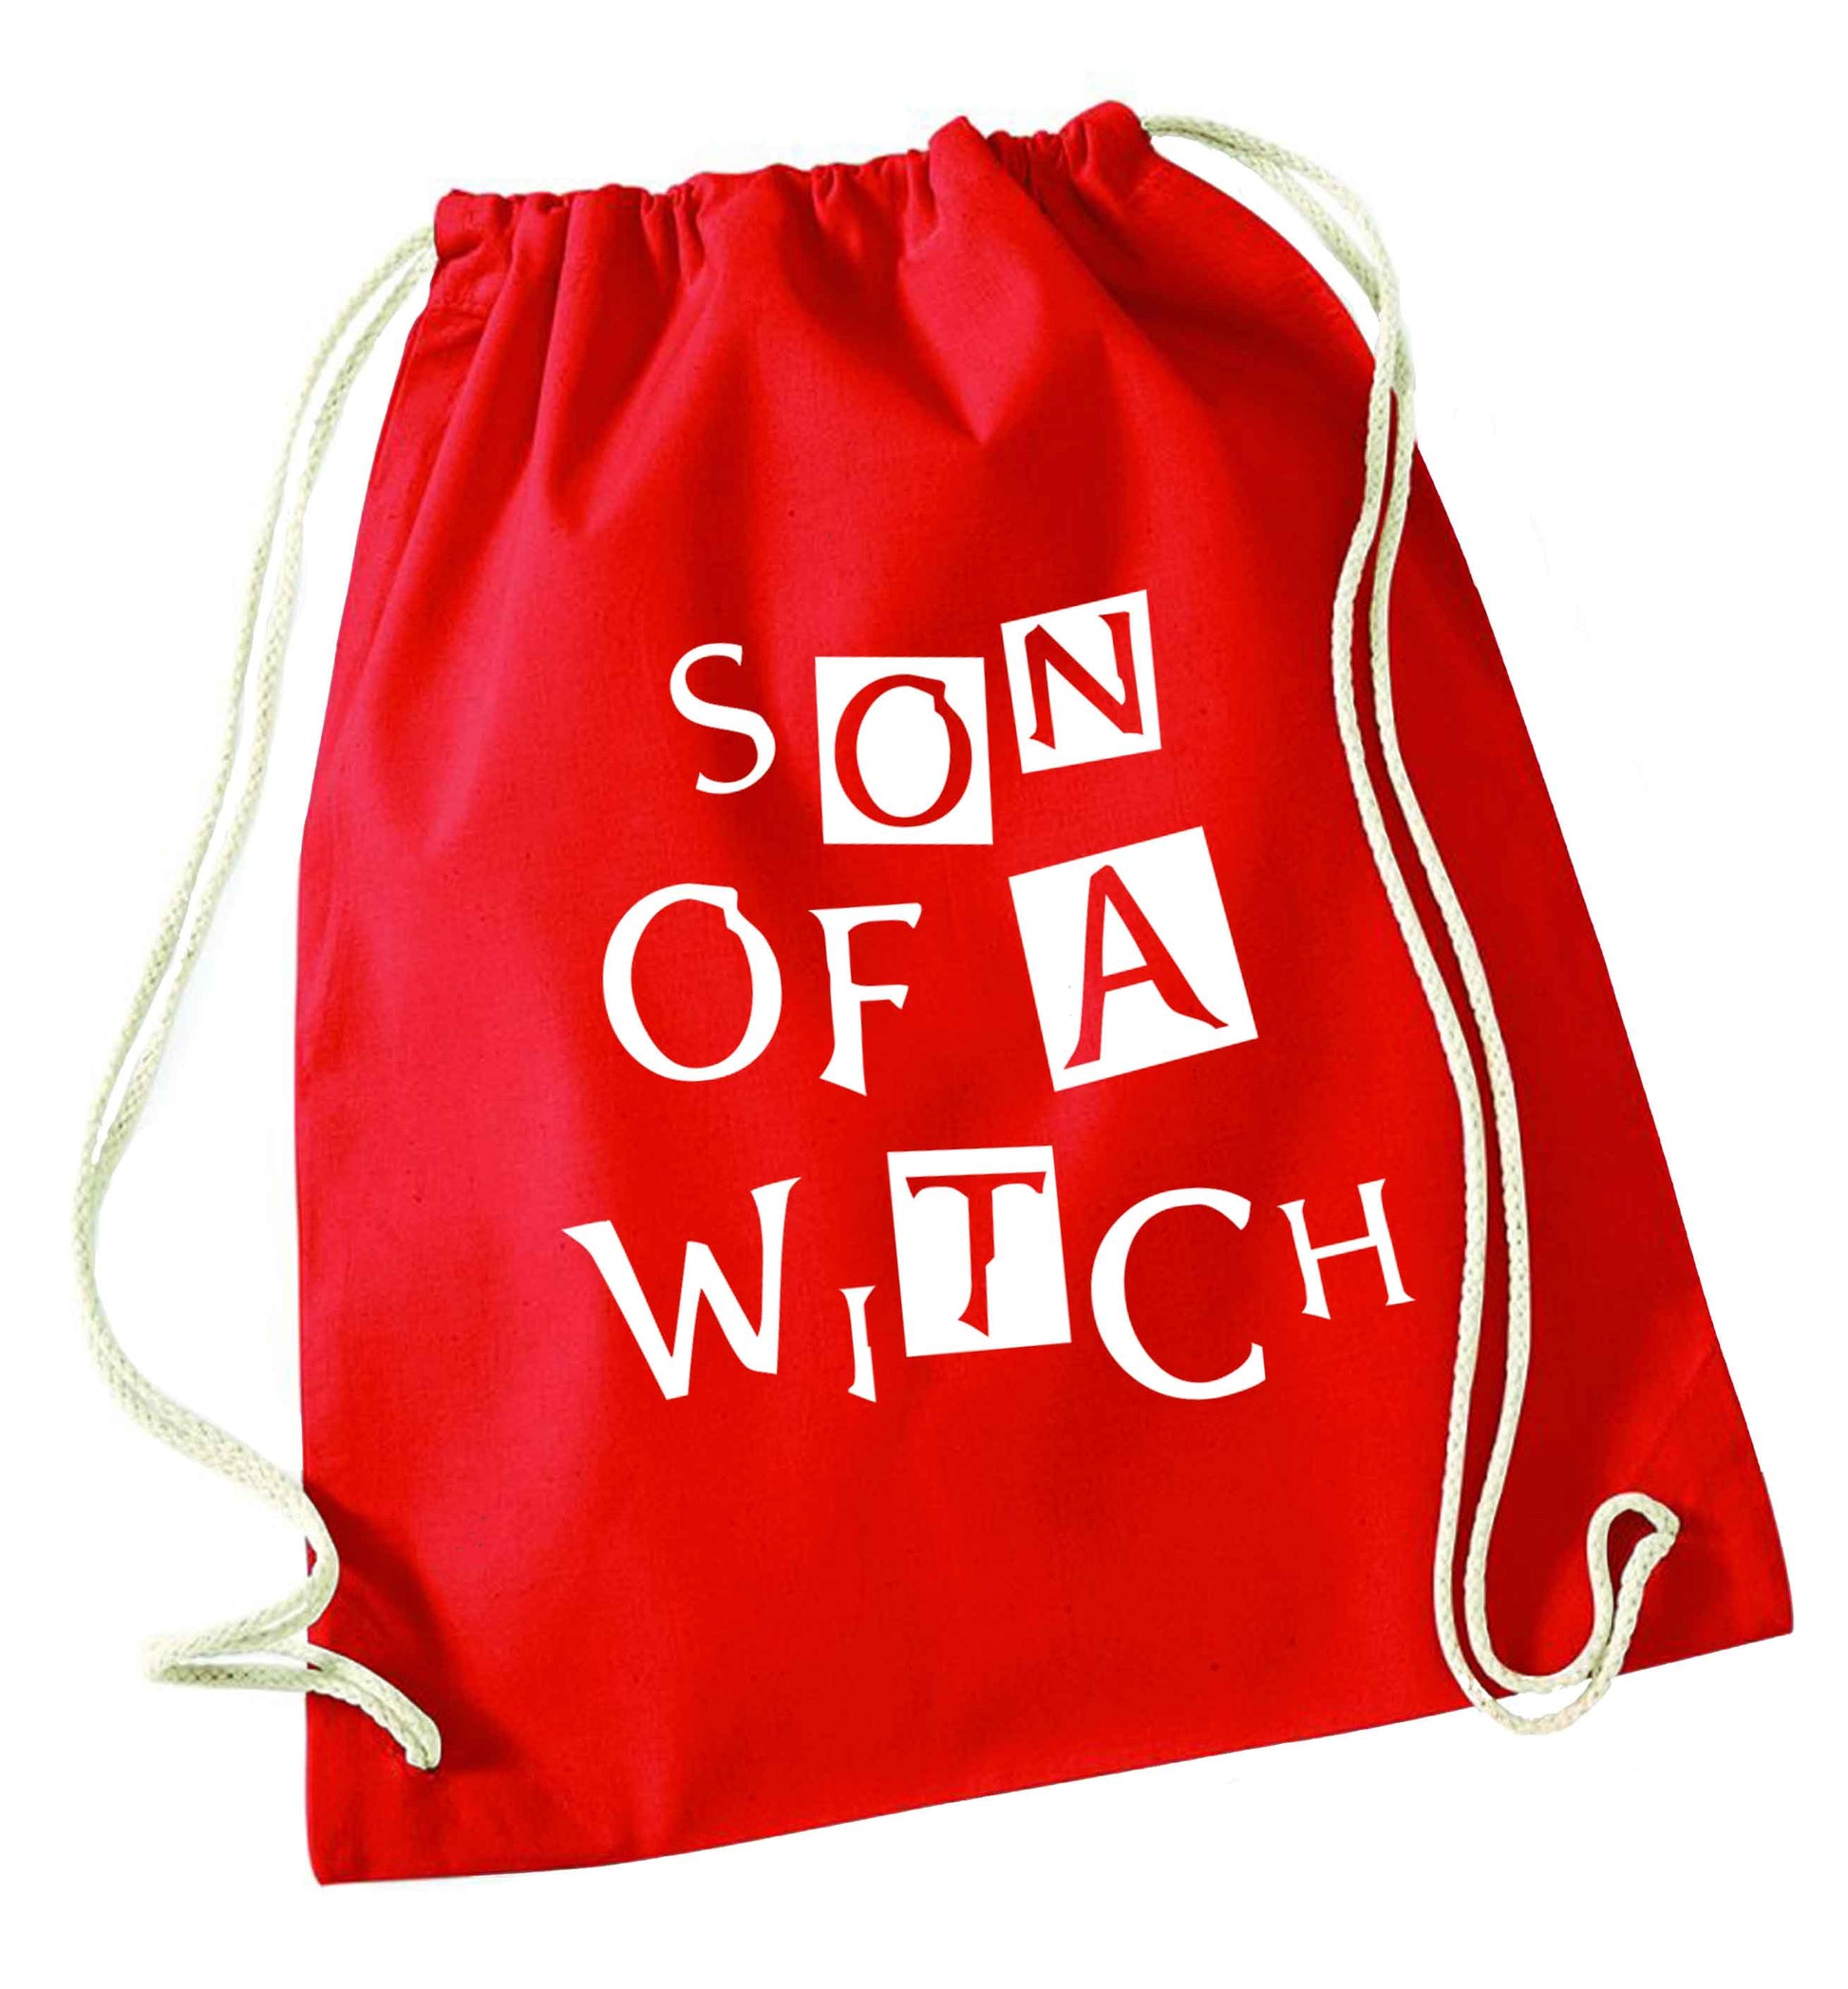 Son of a witch red drawstring bag 